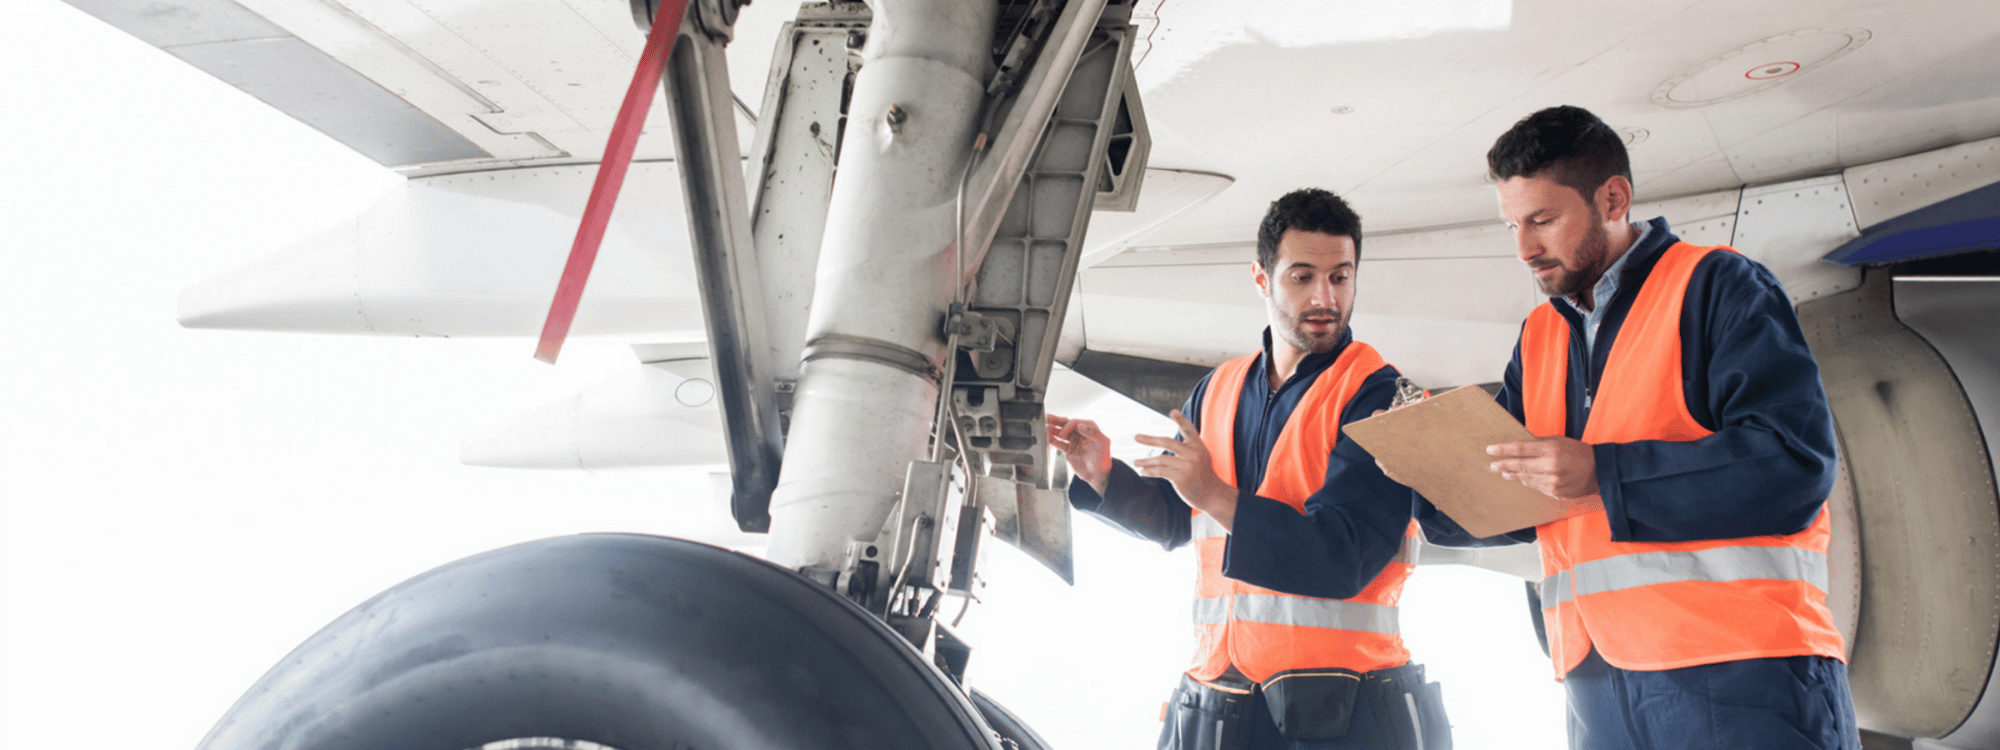 Establish and manage compliance management systems for aviation